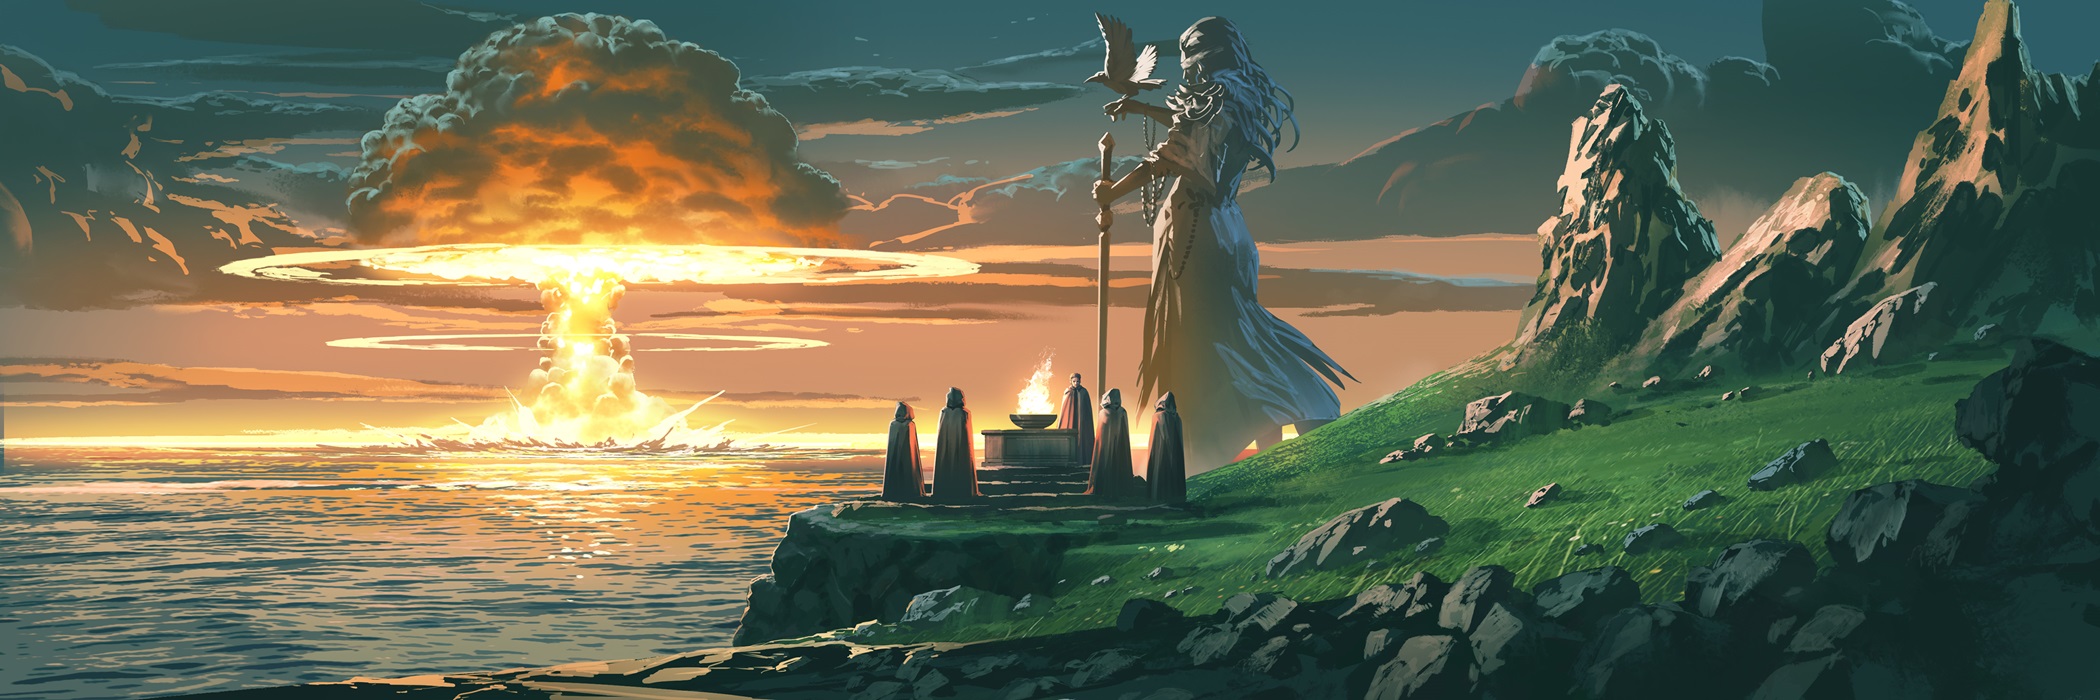 Black-robed figures gather around a fiery altar, conducting a ritual before an awe-inspiring goddess on an island graced with verdant hills. In the sea beyond, a colossal explosion breaks the surface, contrasting the serenity of the island with a distant turmoil.